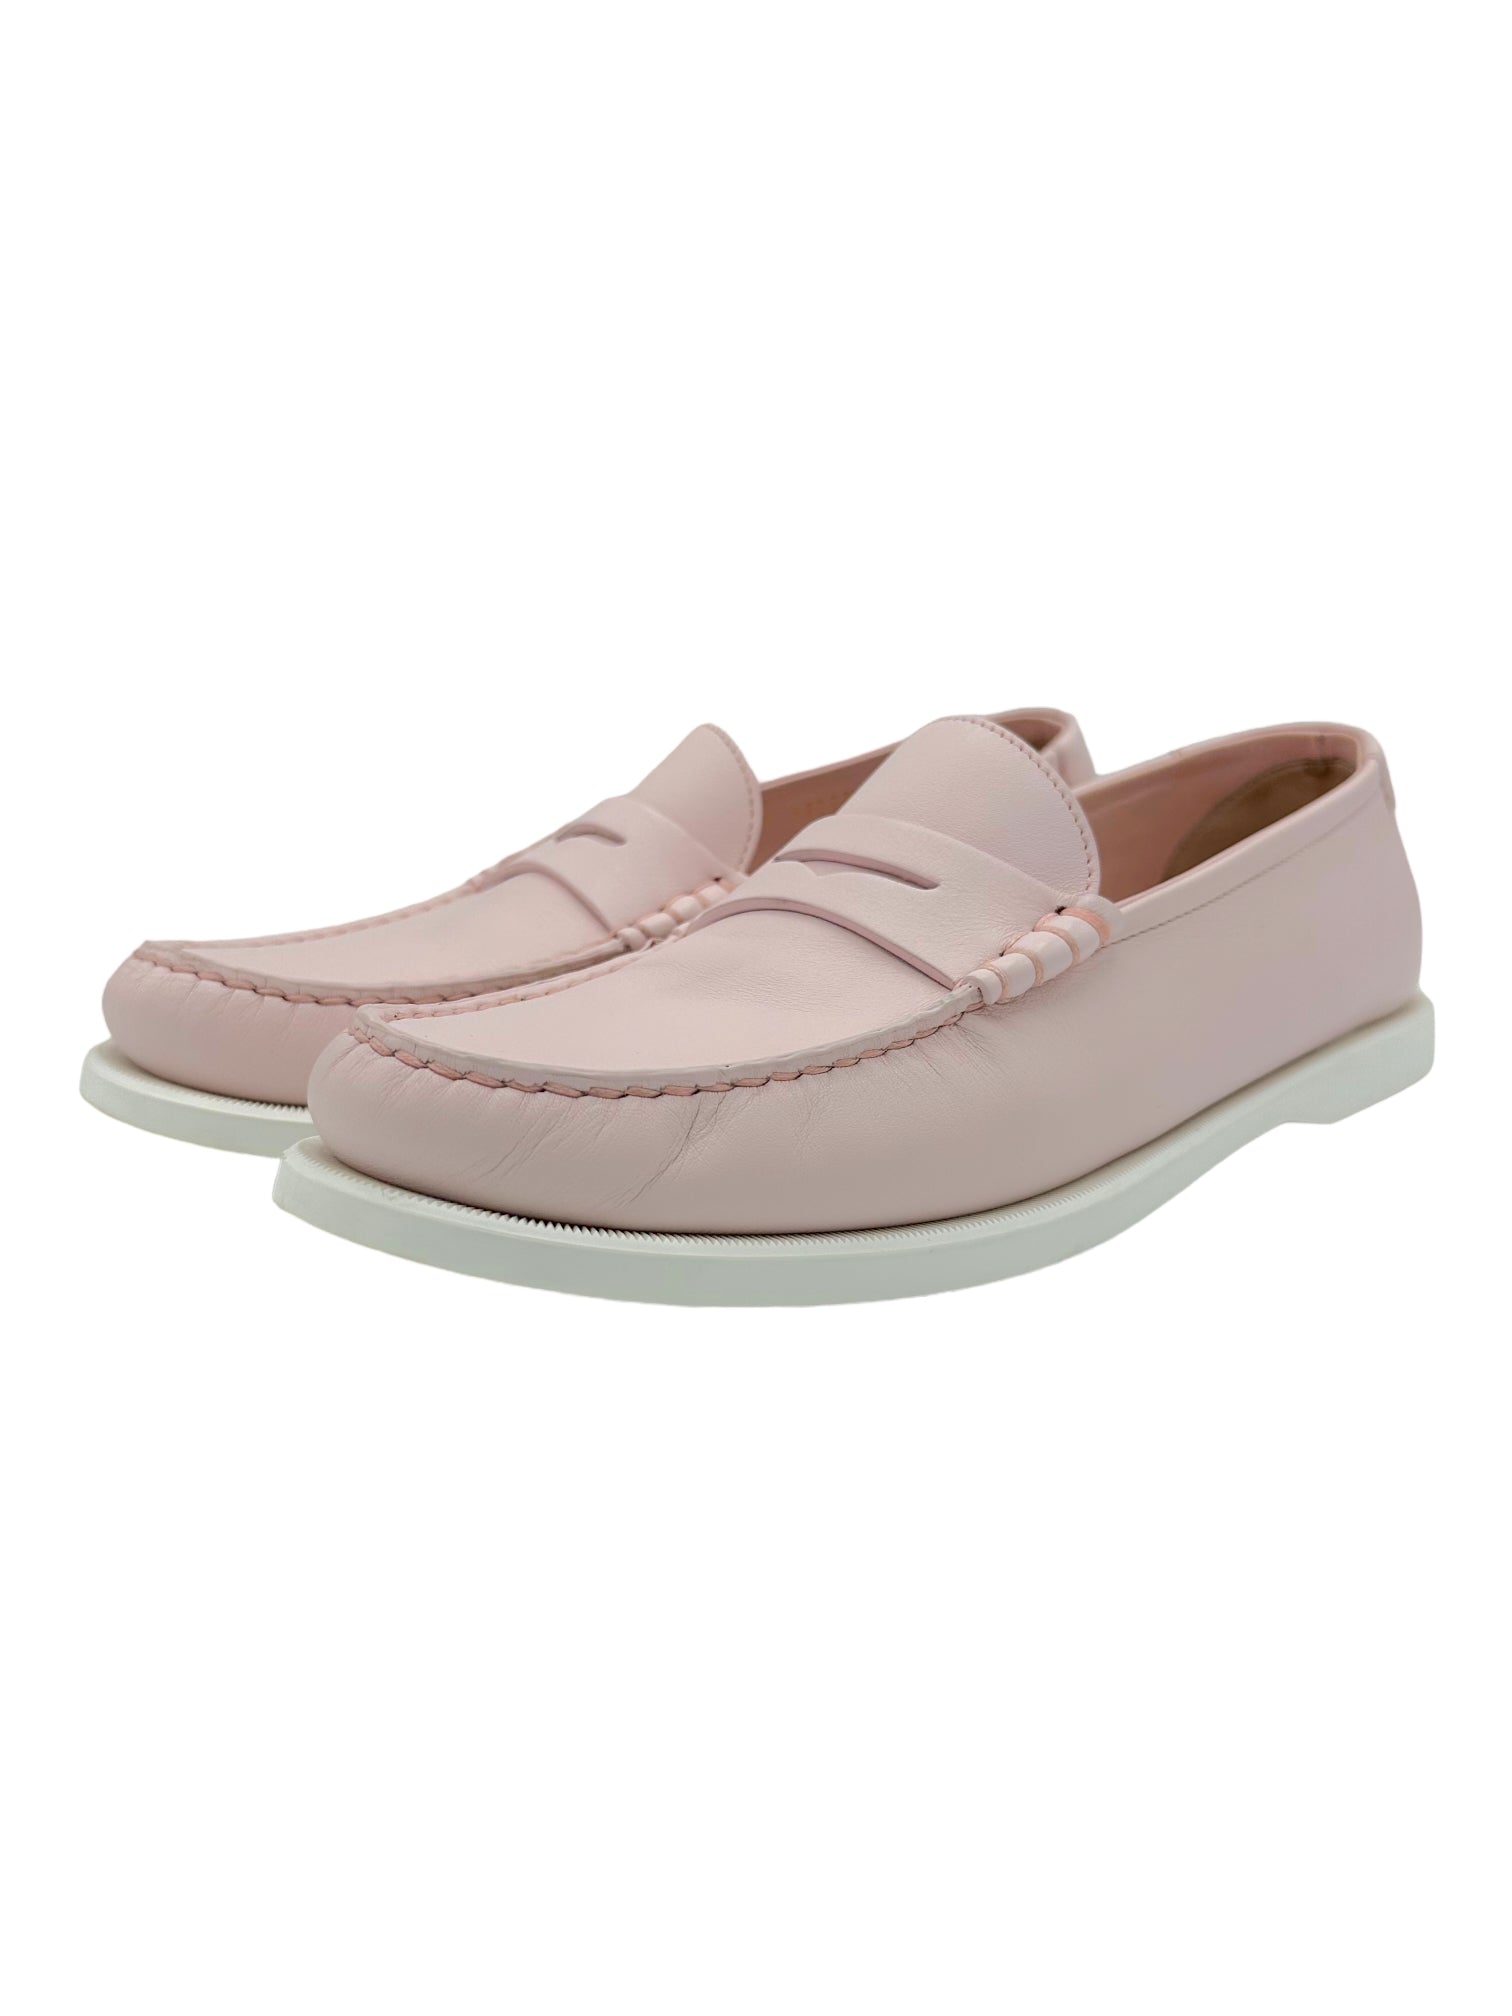 Saint Laurent Le Monogram Pink Penny Loafer - Genuine Design luxury consignment Calgary, Canada New and pre-owned clothing, shoes, accessories.